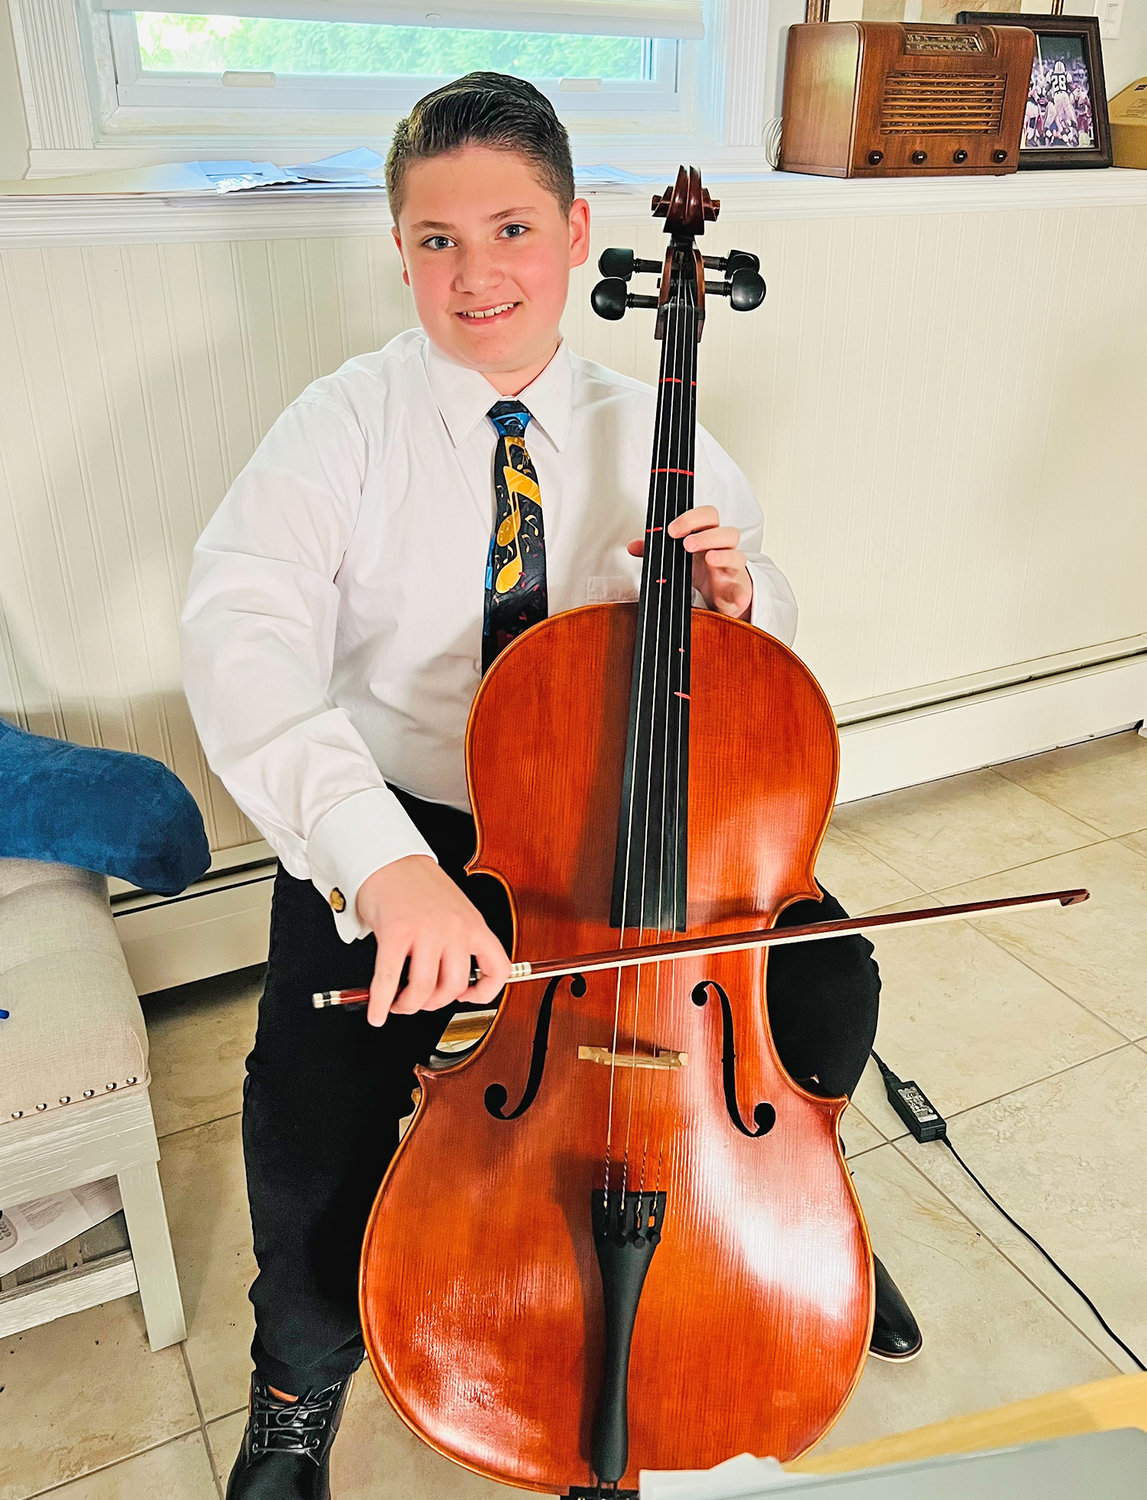 James “Jimmy” Cooper, 13, of Rome, practices his cello 2-3 hours a day, which recently helped him earn an audition and successful entry into the Symphoria Youth Repertory Orchestra in Syracuse. He starts rehearsals in September.